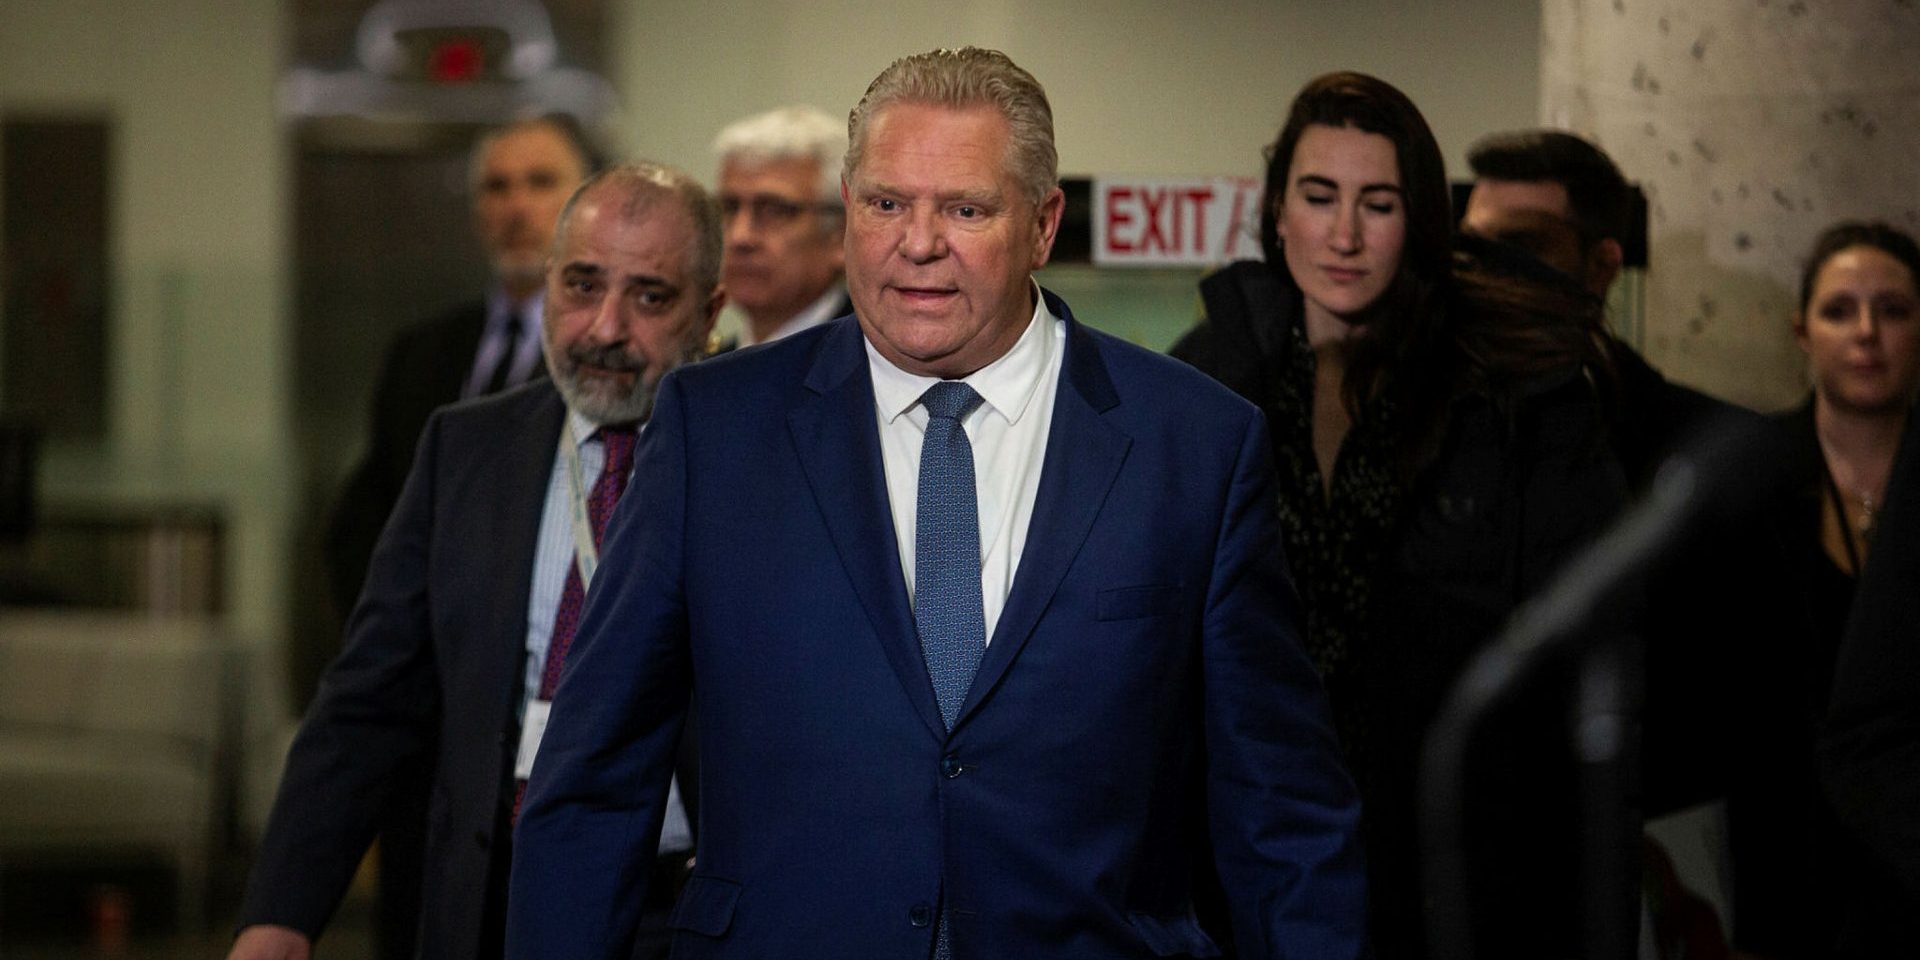 Ontario Premier Doug Ford leaves 90 Elgin St. in Ottawa on Feb. 7, 2023, after  a meetimng with fellow Premiers and the Prime Minister to discuss a healthcare deal. Andrew Meade